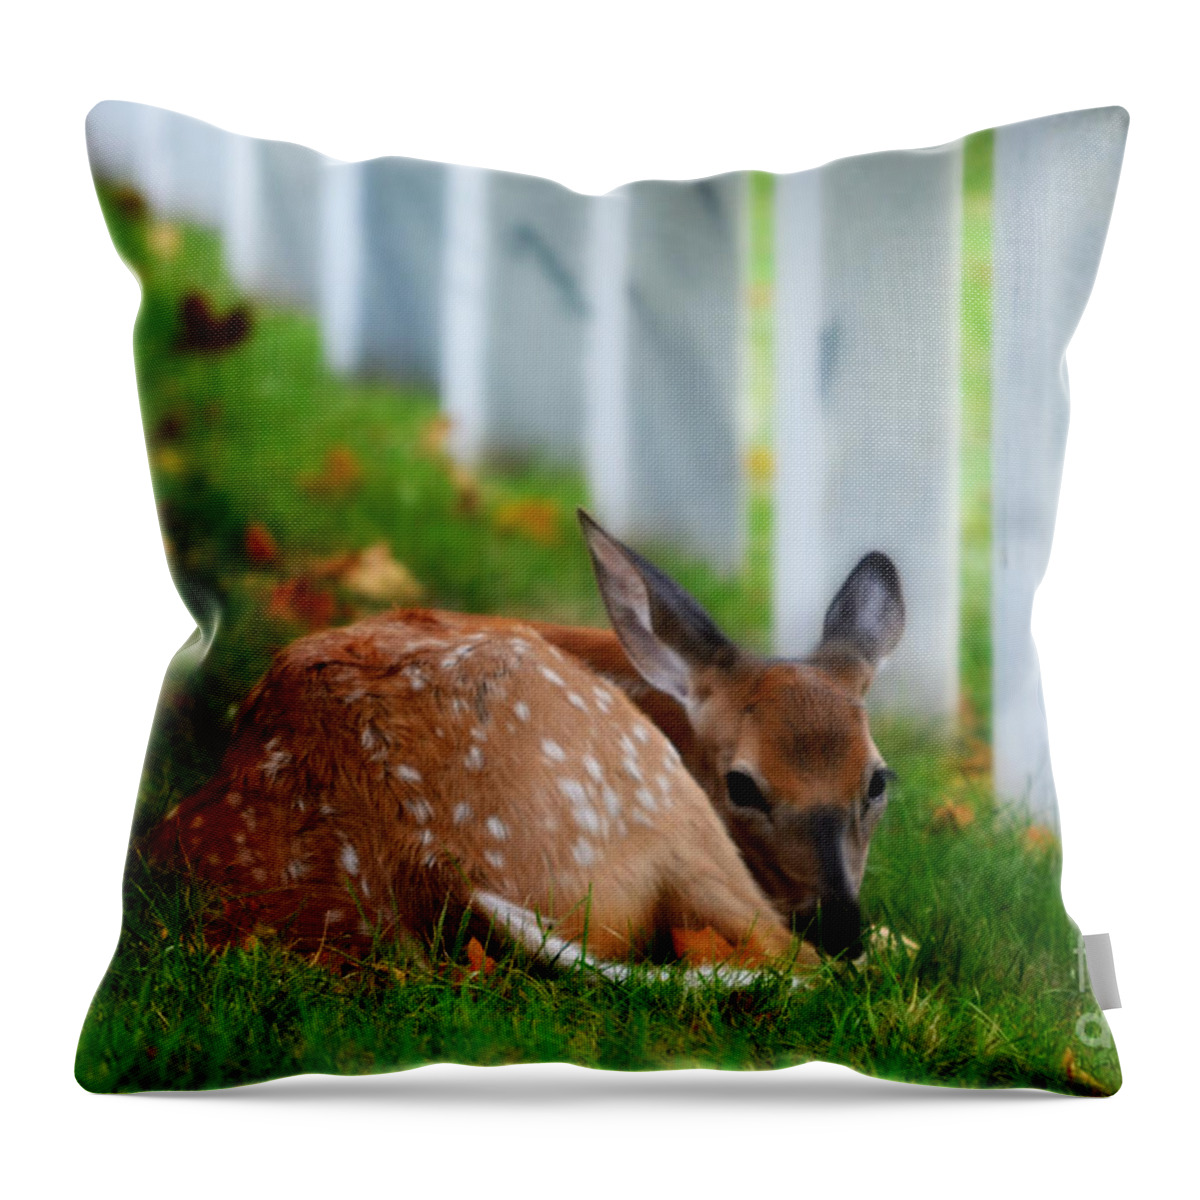 Landscape Throw Pillow featuring the photograph Protecting Our Heros by Peggy Franz